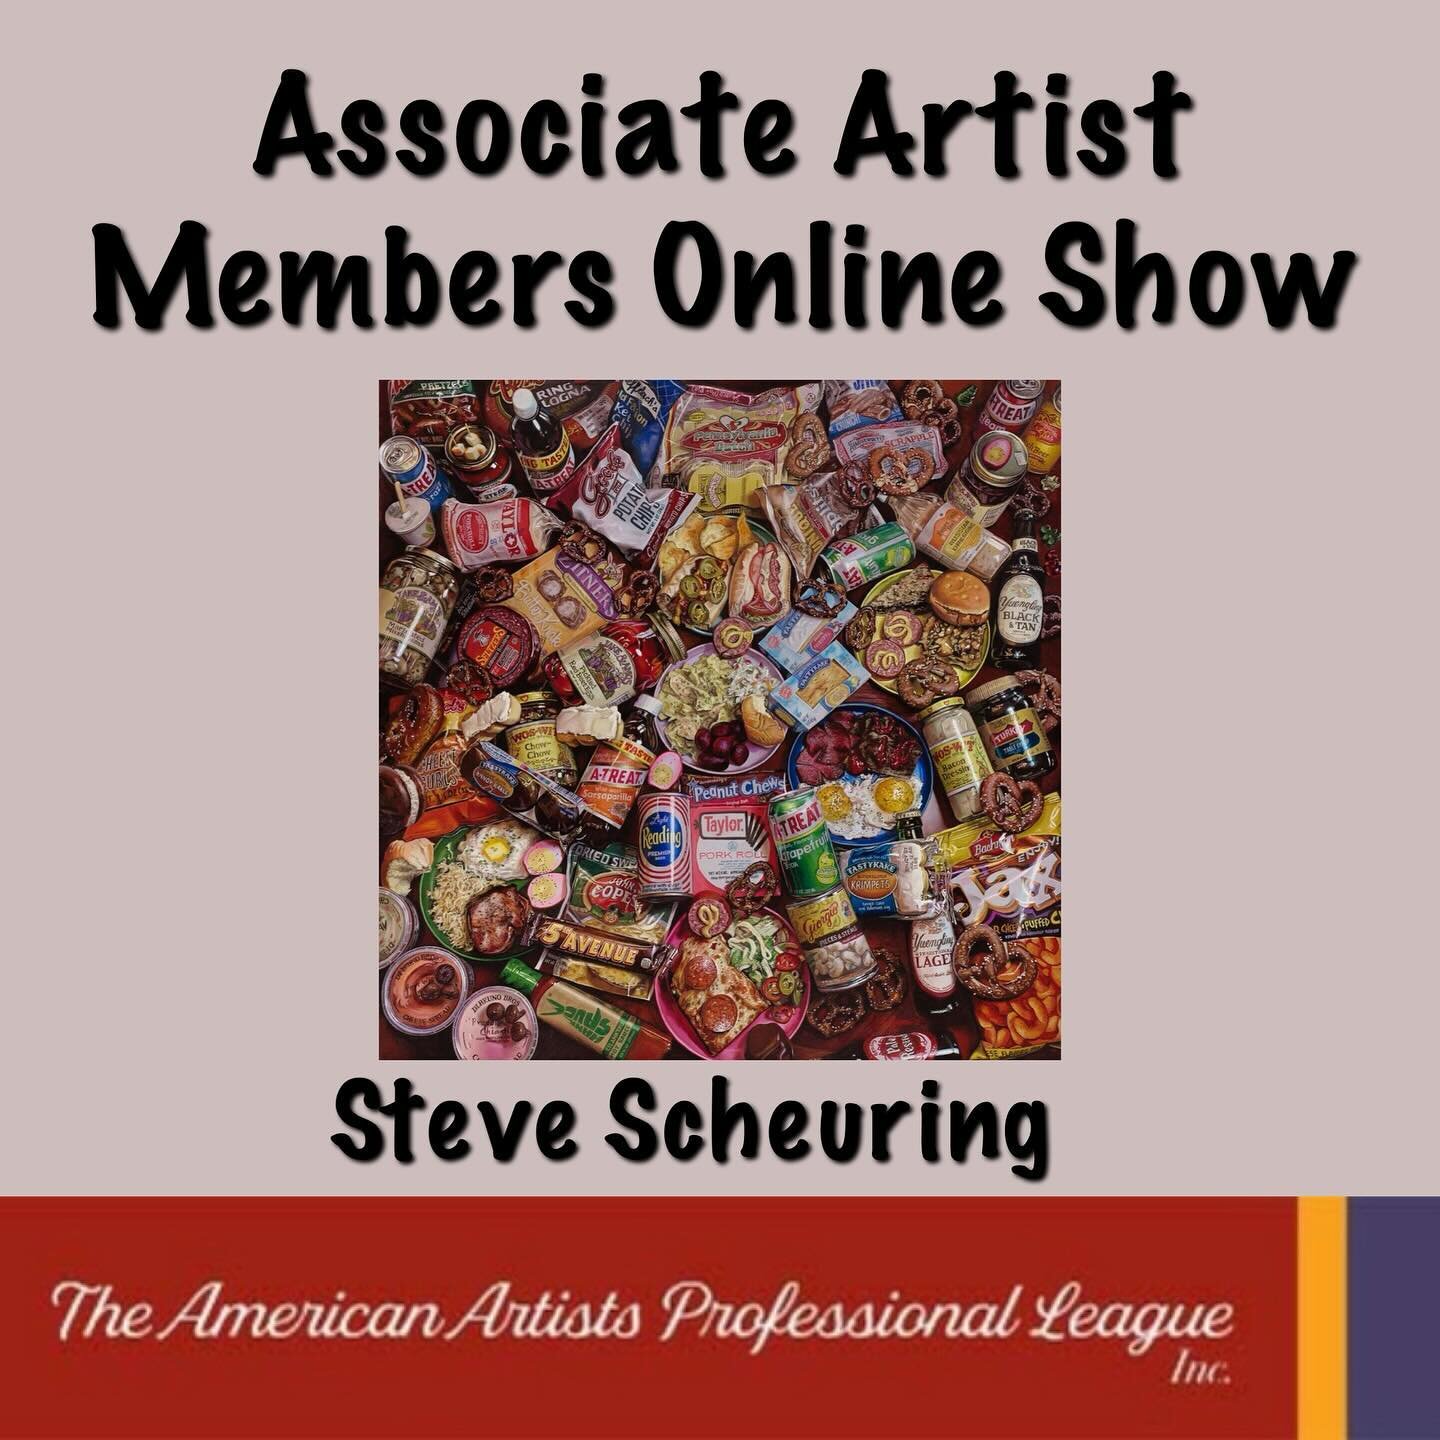 Artist Spotlight!  Today The American Artist Professional League proudly presents member Steve Scheuring and his painting #Tastes of Home&rdquo; as part of our Associate Member OnLine Show. 

We cannot say enough good things about this painting, what